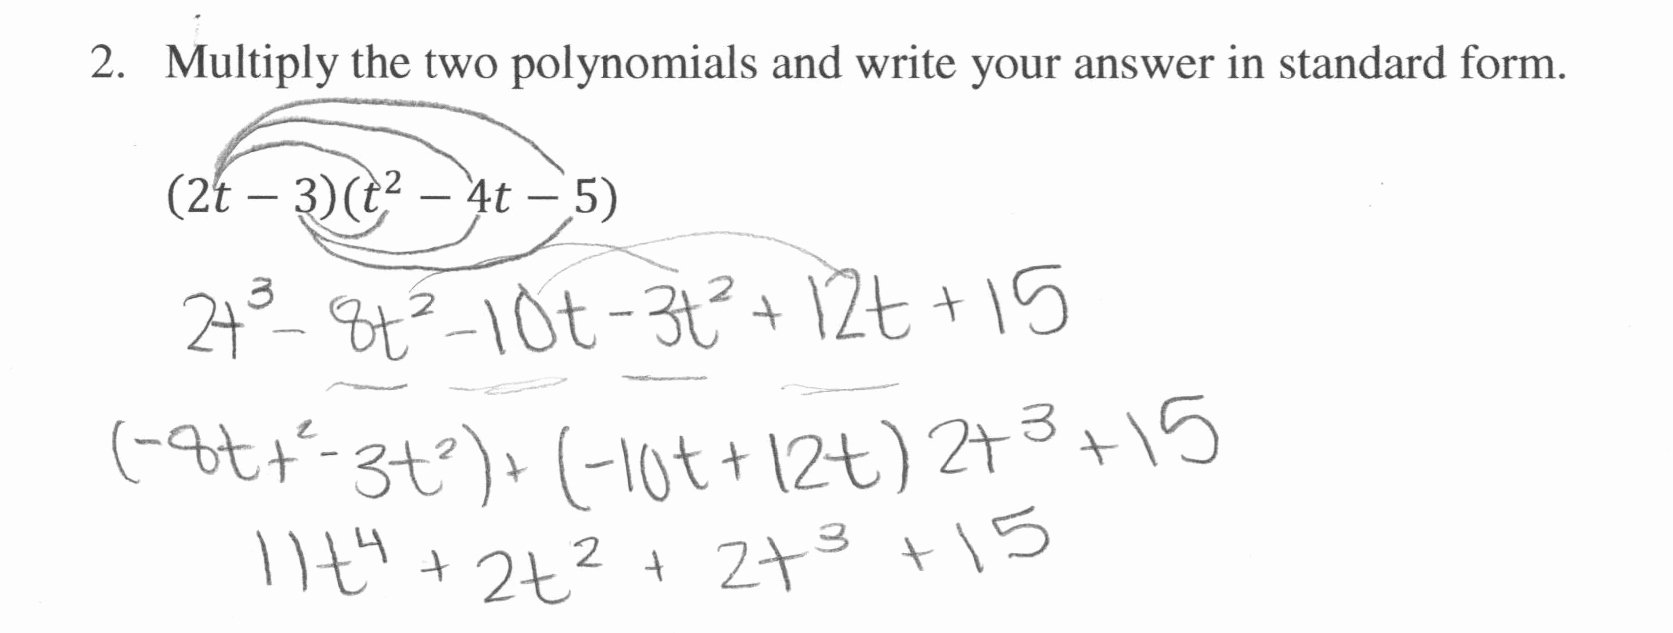 Multiplying Polynomials Worksheet Answers Unique Multiplying A Polynomial by A Monomial Worksheet